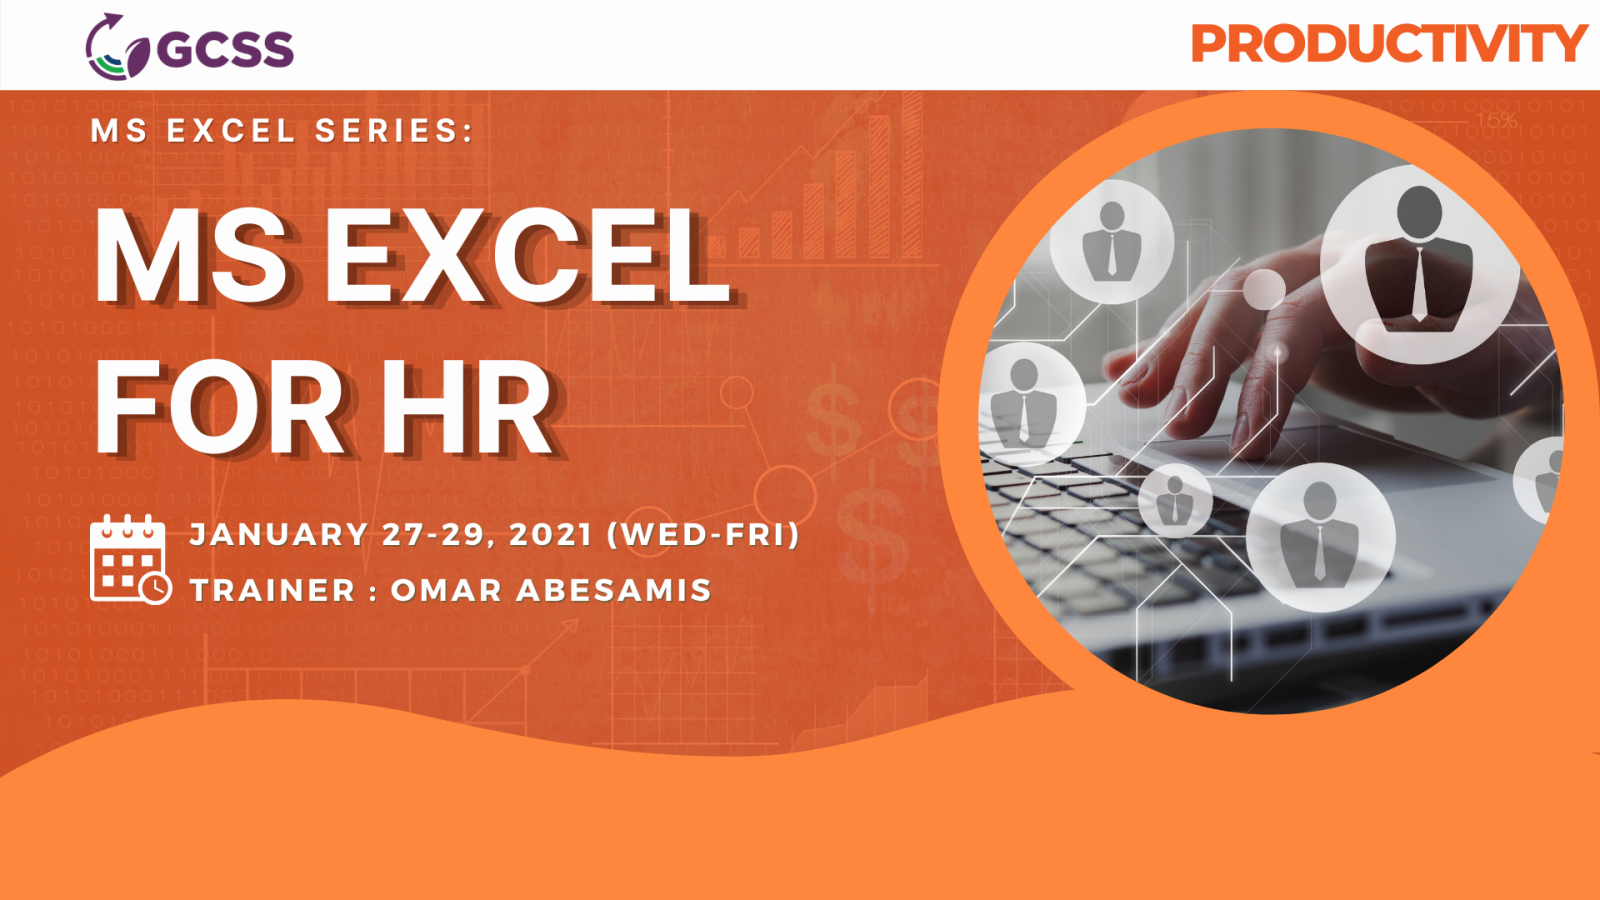 Ms Excel for HR, Manila, National Capital Region, Philippines